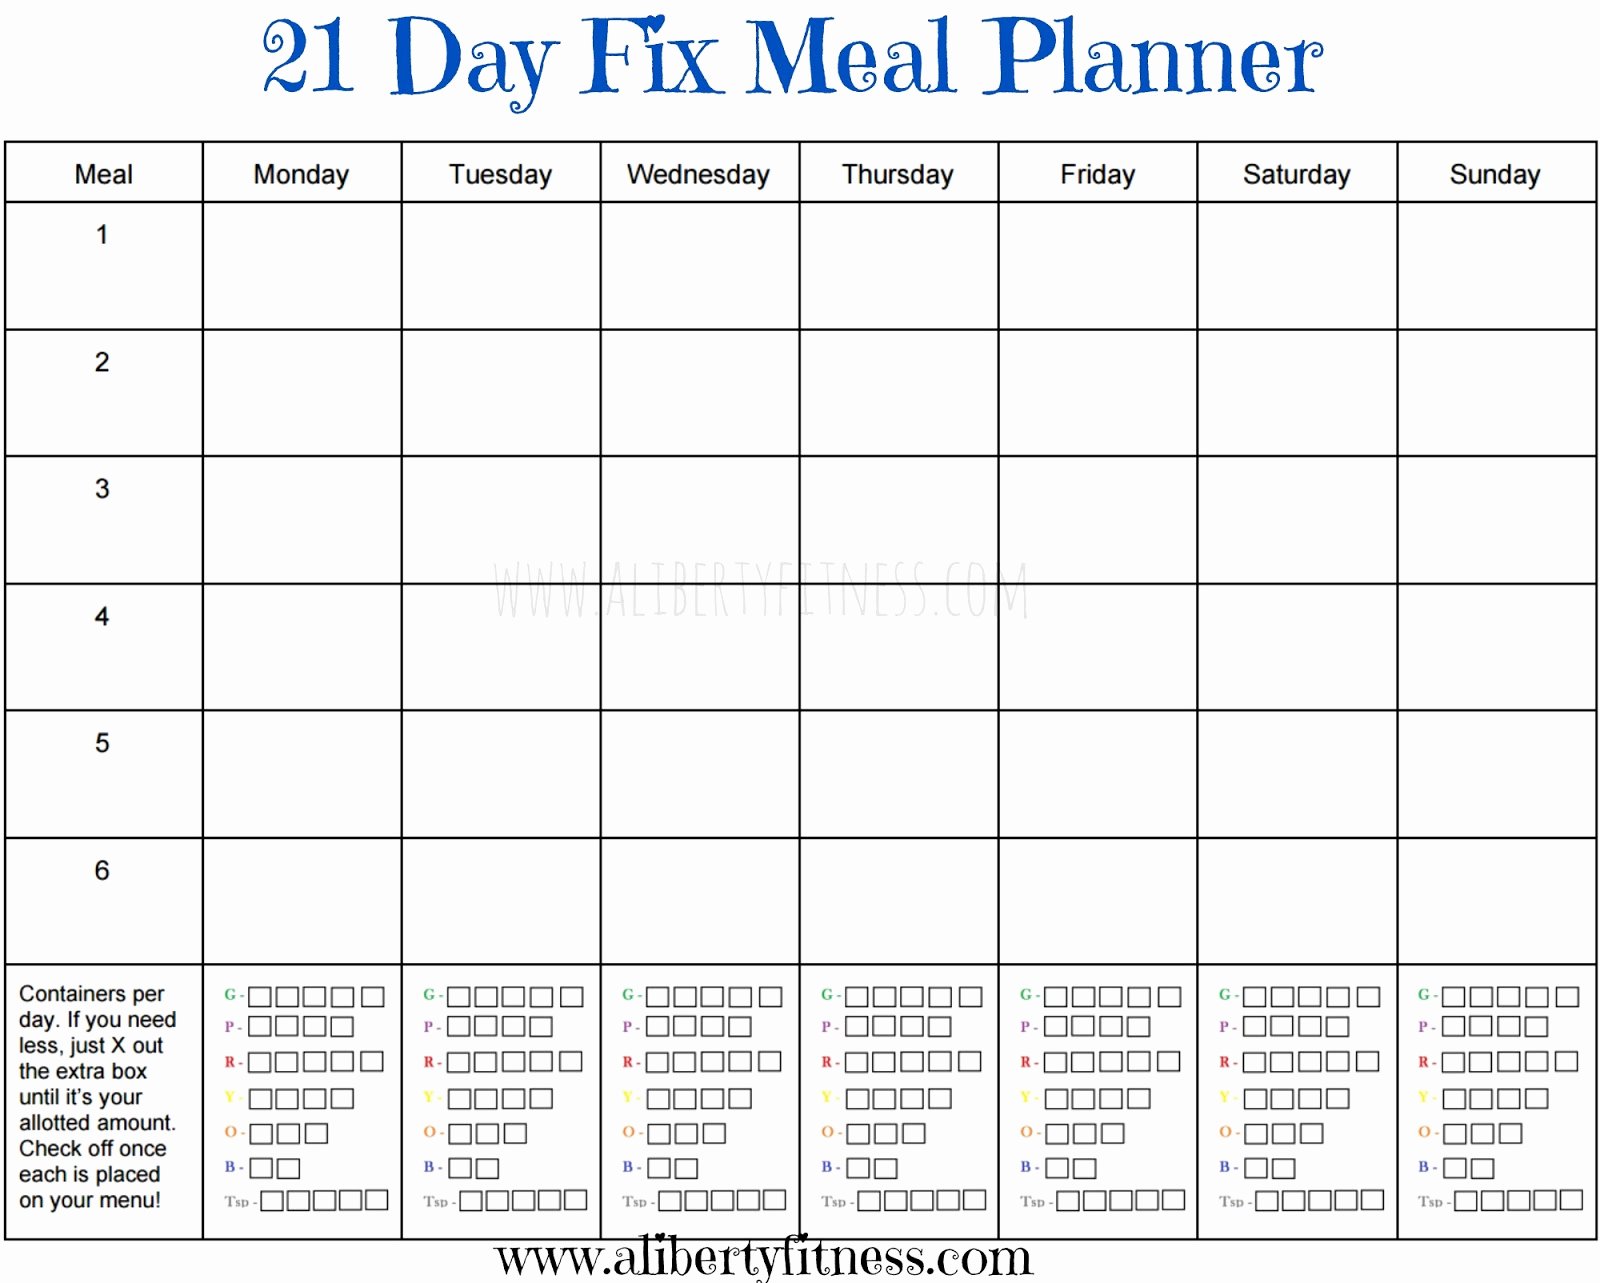 Meal Plan Calendar Template Fresh Grace &amp; Grit 21 Day Fix Meal Planner and Grocery List